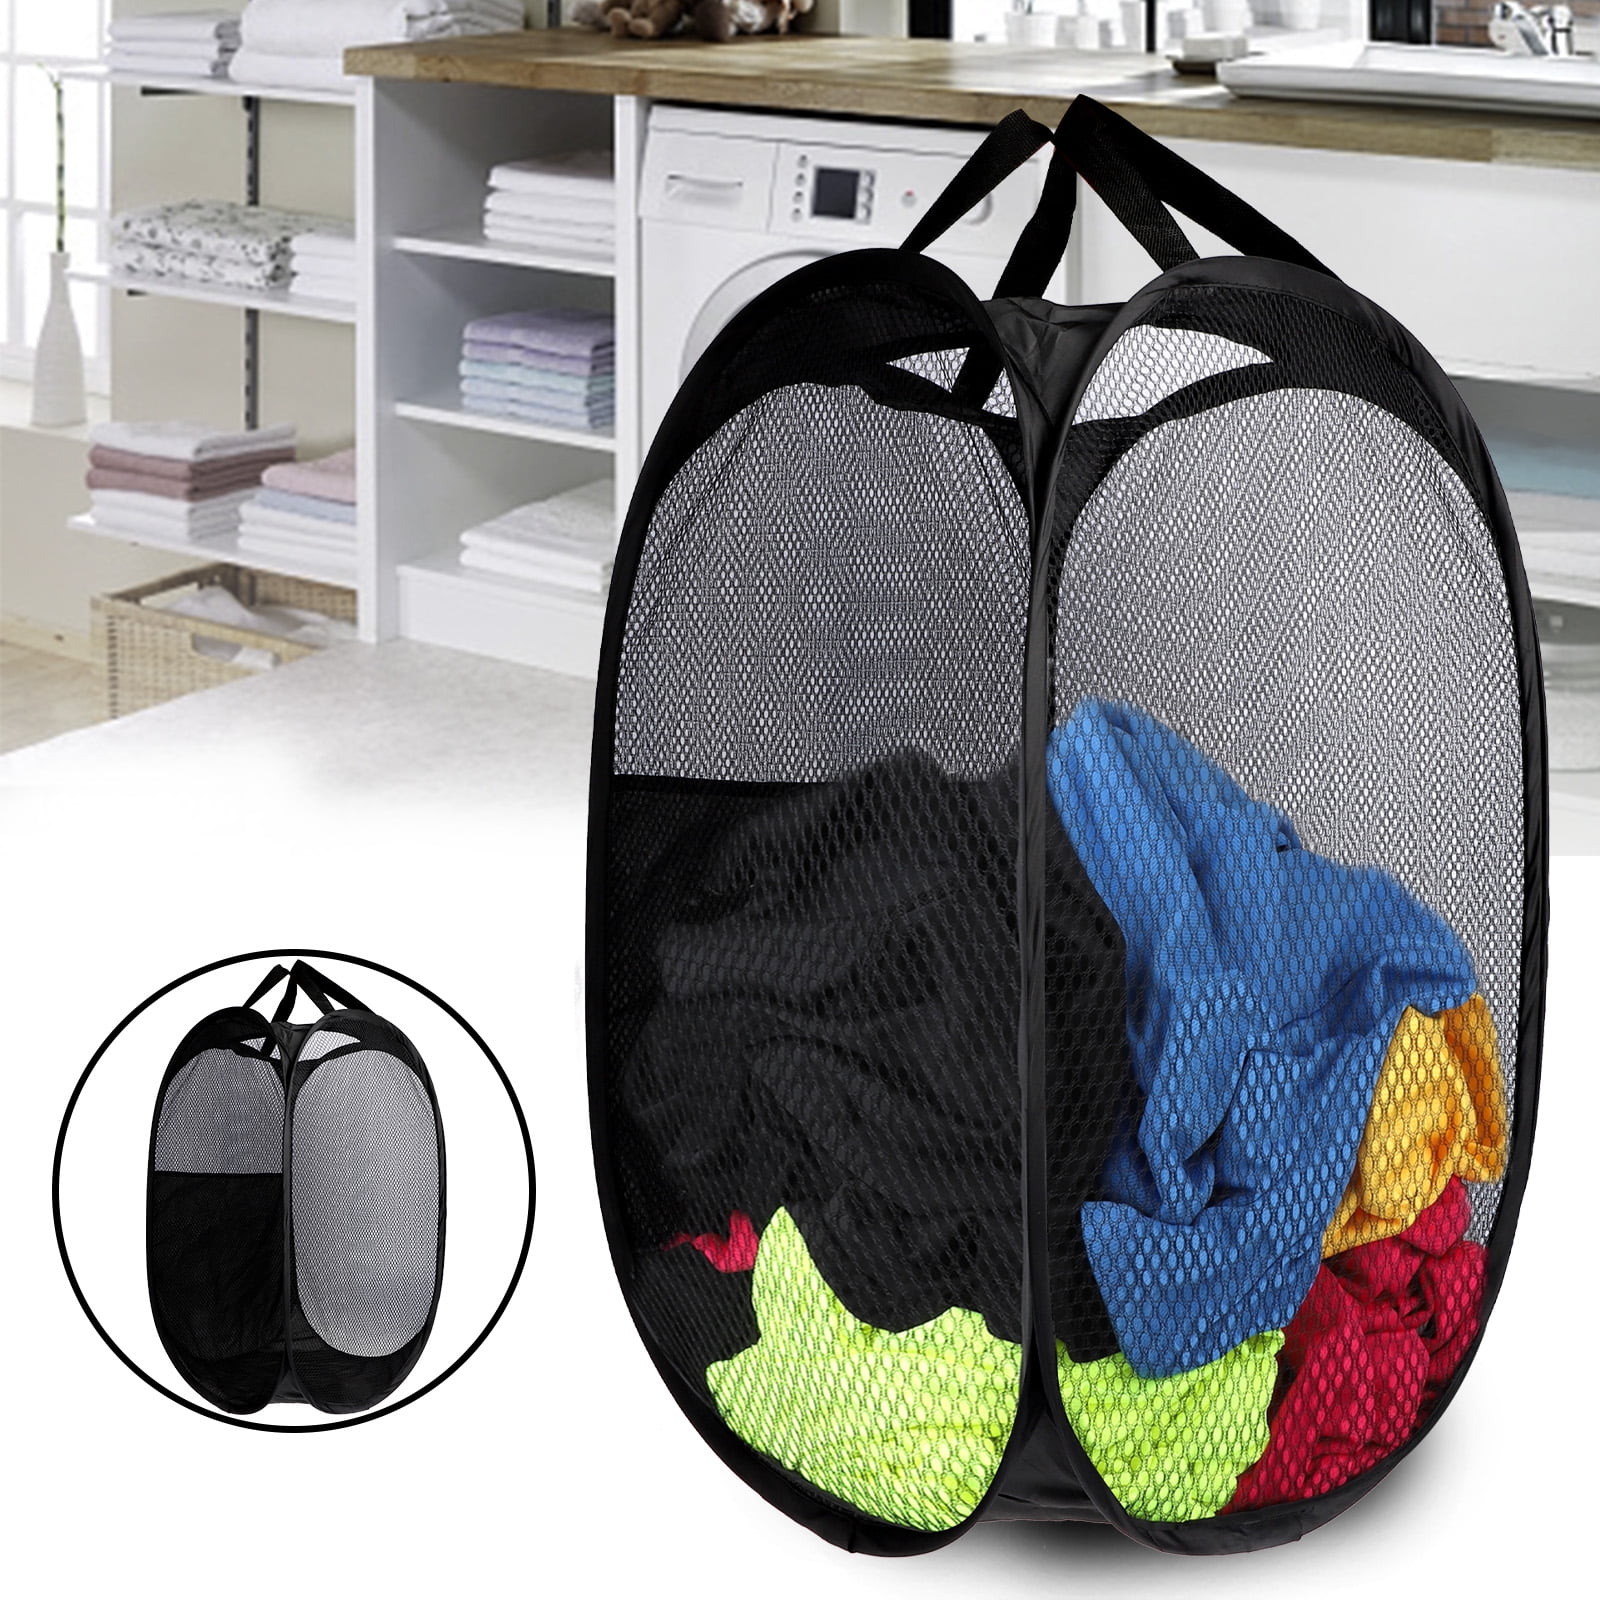 Large Mesh Pop-up Laundry Basket, TSV Collapsible Laundry Hamper with  Sturdy Steel Wire Frame and Durable Handles for Kid Room, Dorm, Bedroom,  Bathroom, Laundry Room, Black 